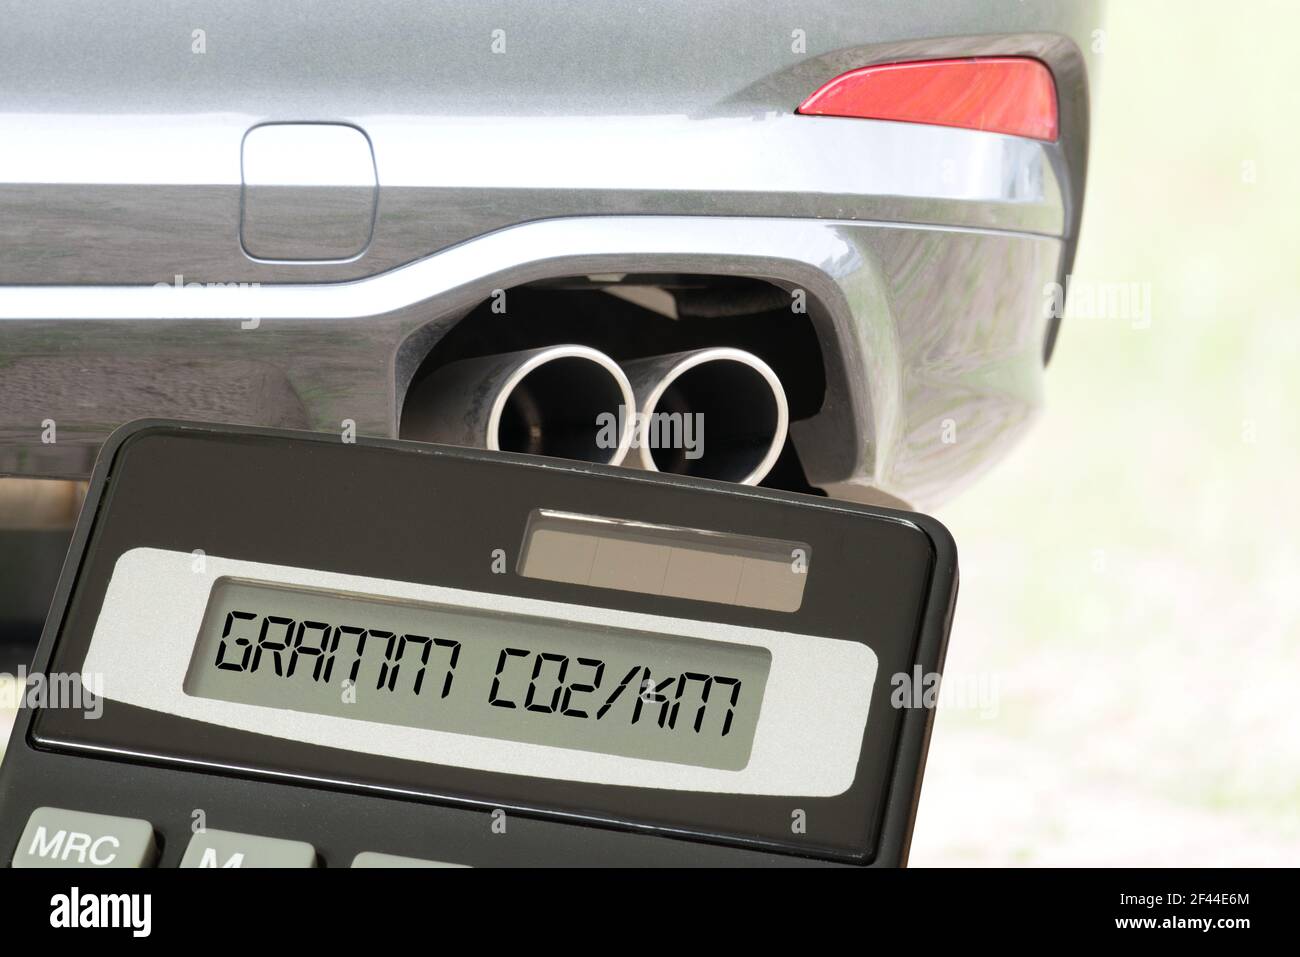 A car, exhaust, calculator and Co2 emissions Stock Photo - Alamy